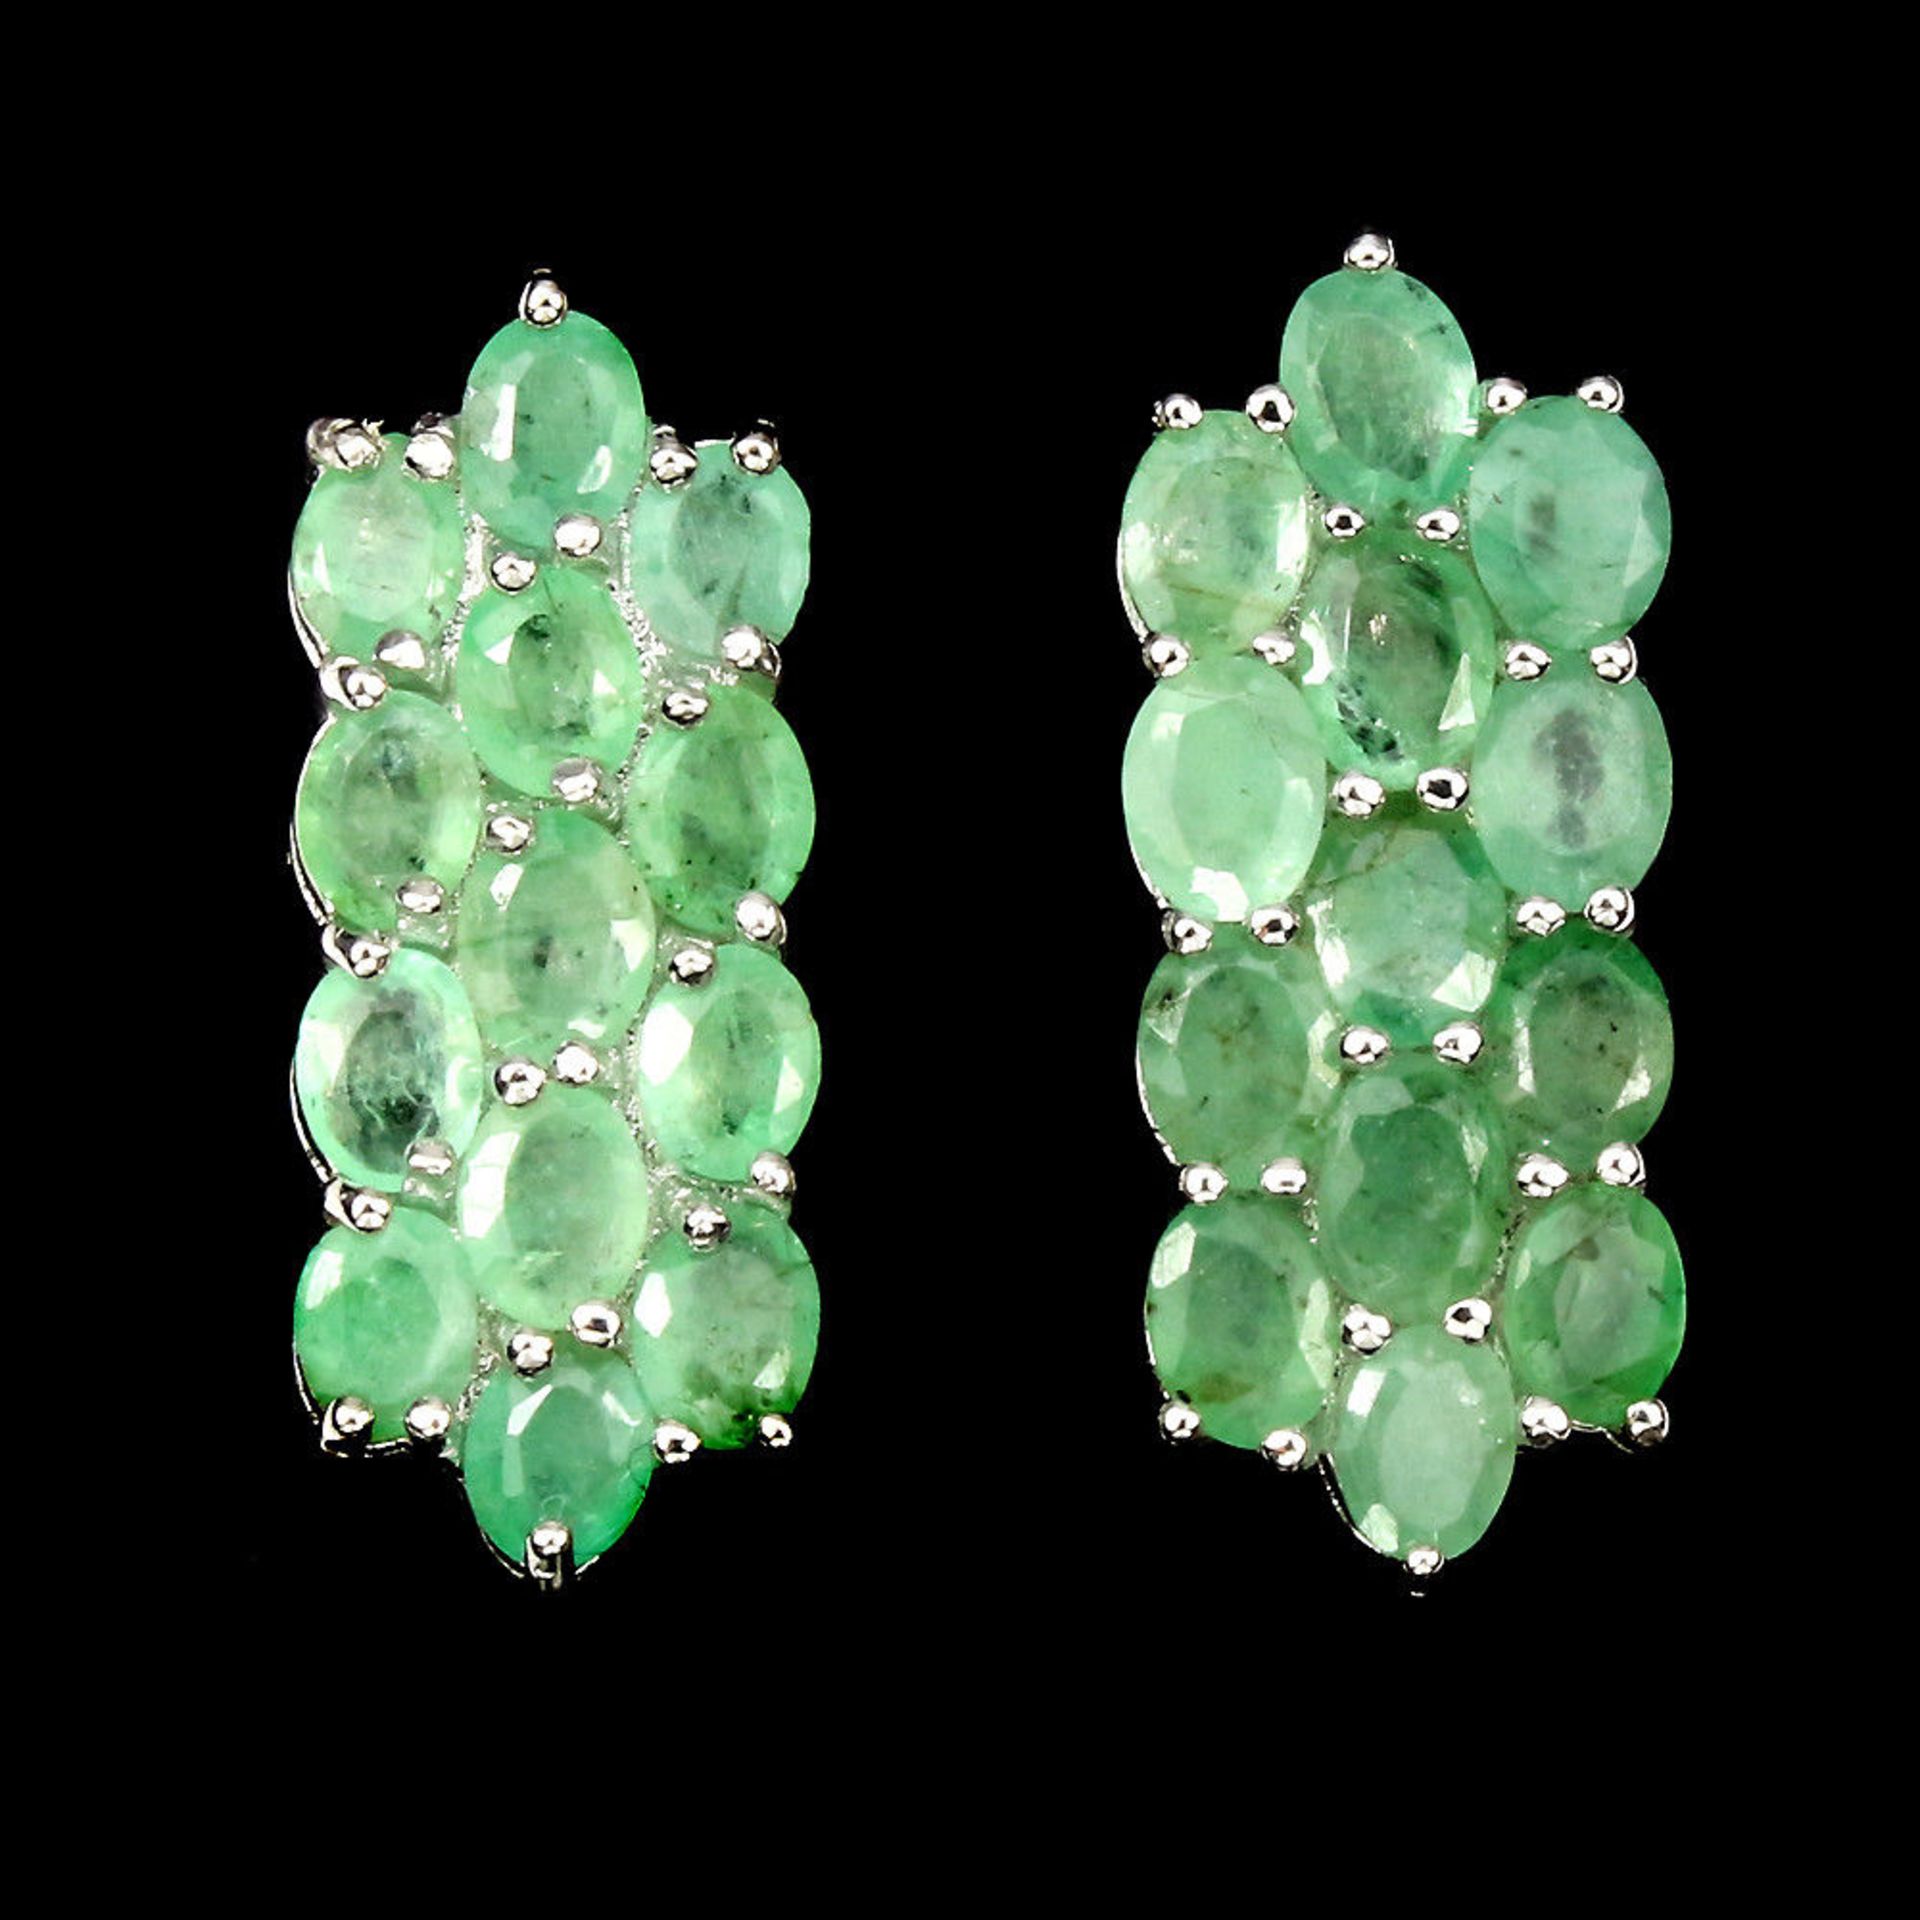 A Stunning Pair of Natural Brazilian Emerald Earrings, Set with 13 Natural Emeralds in each Earring.